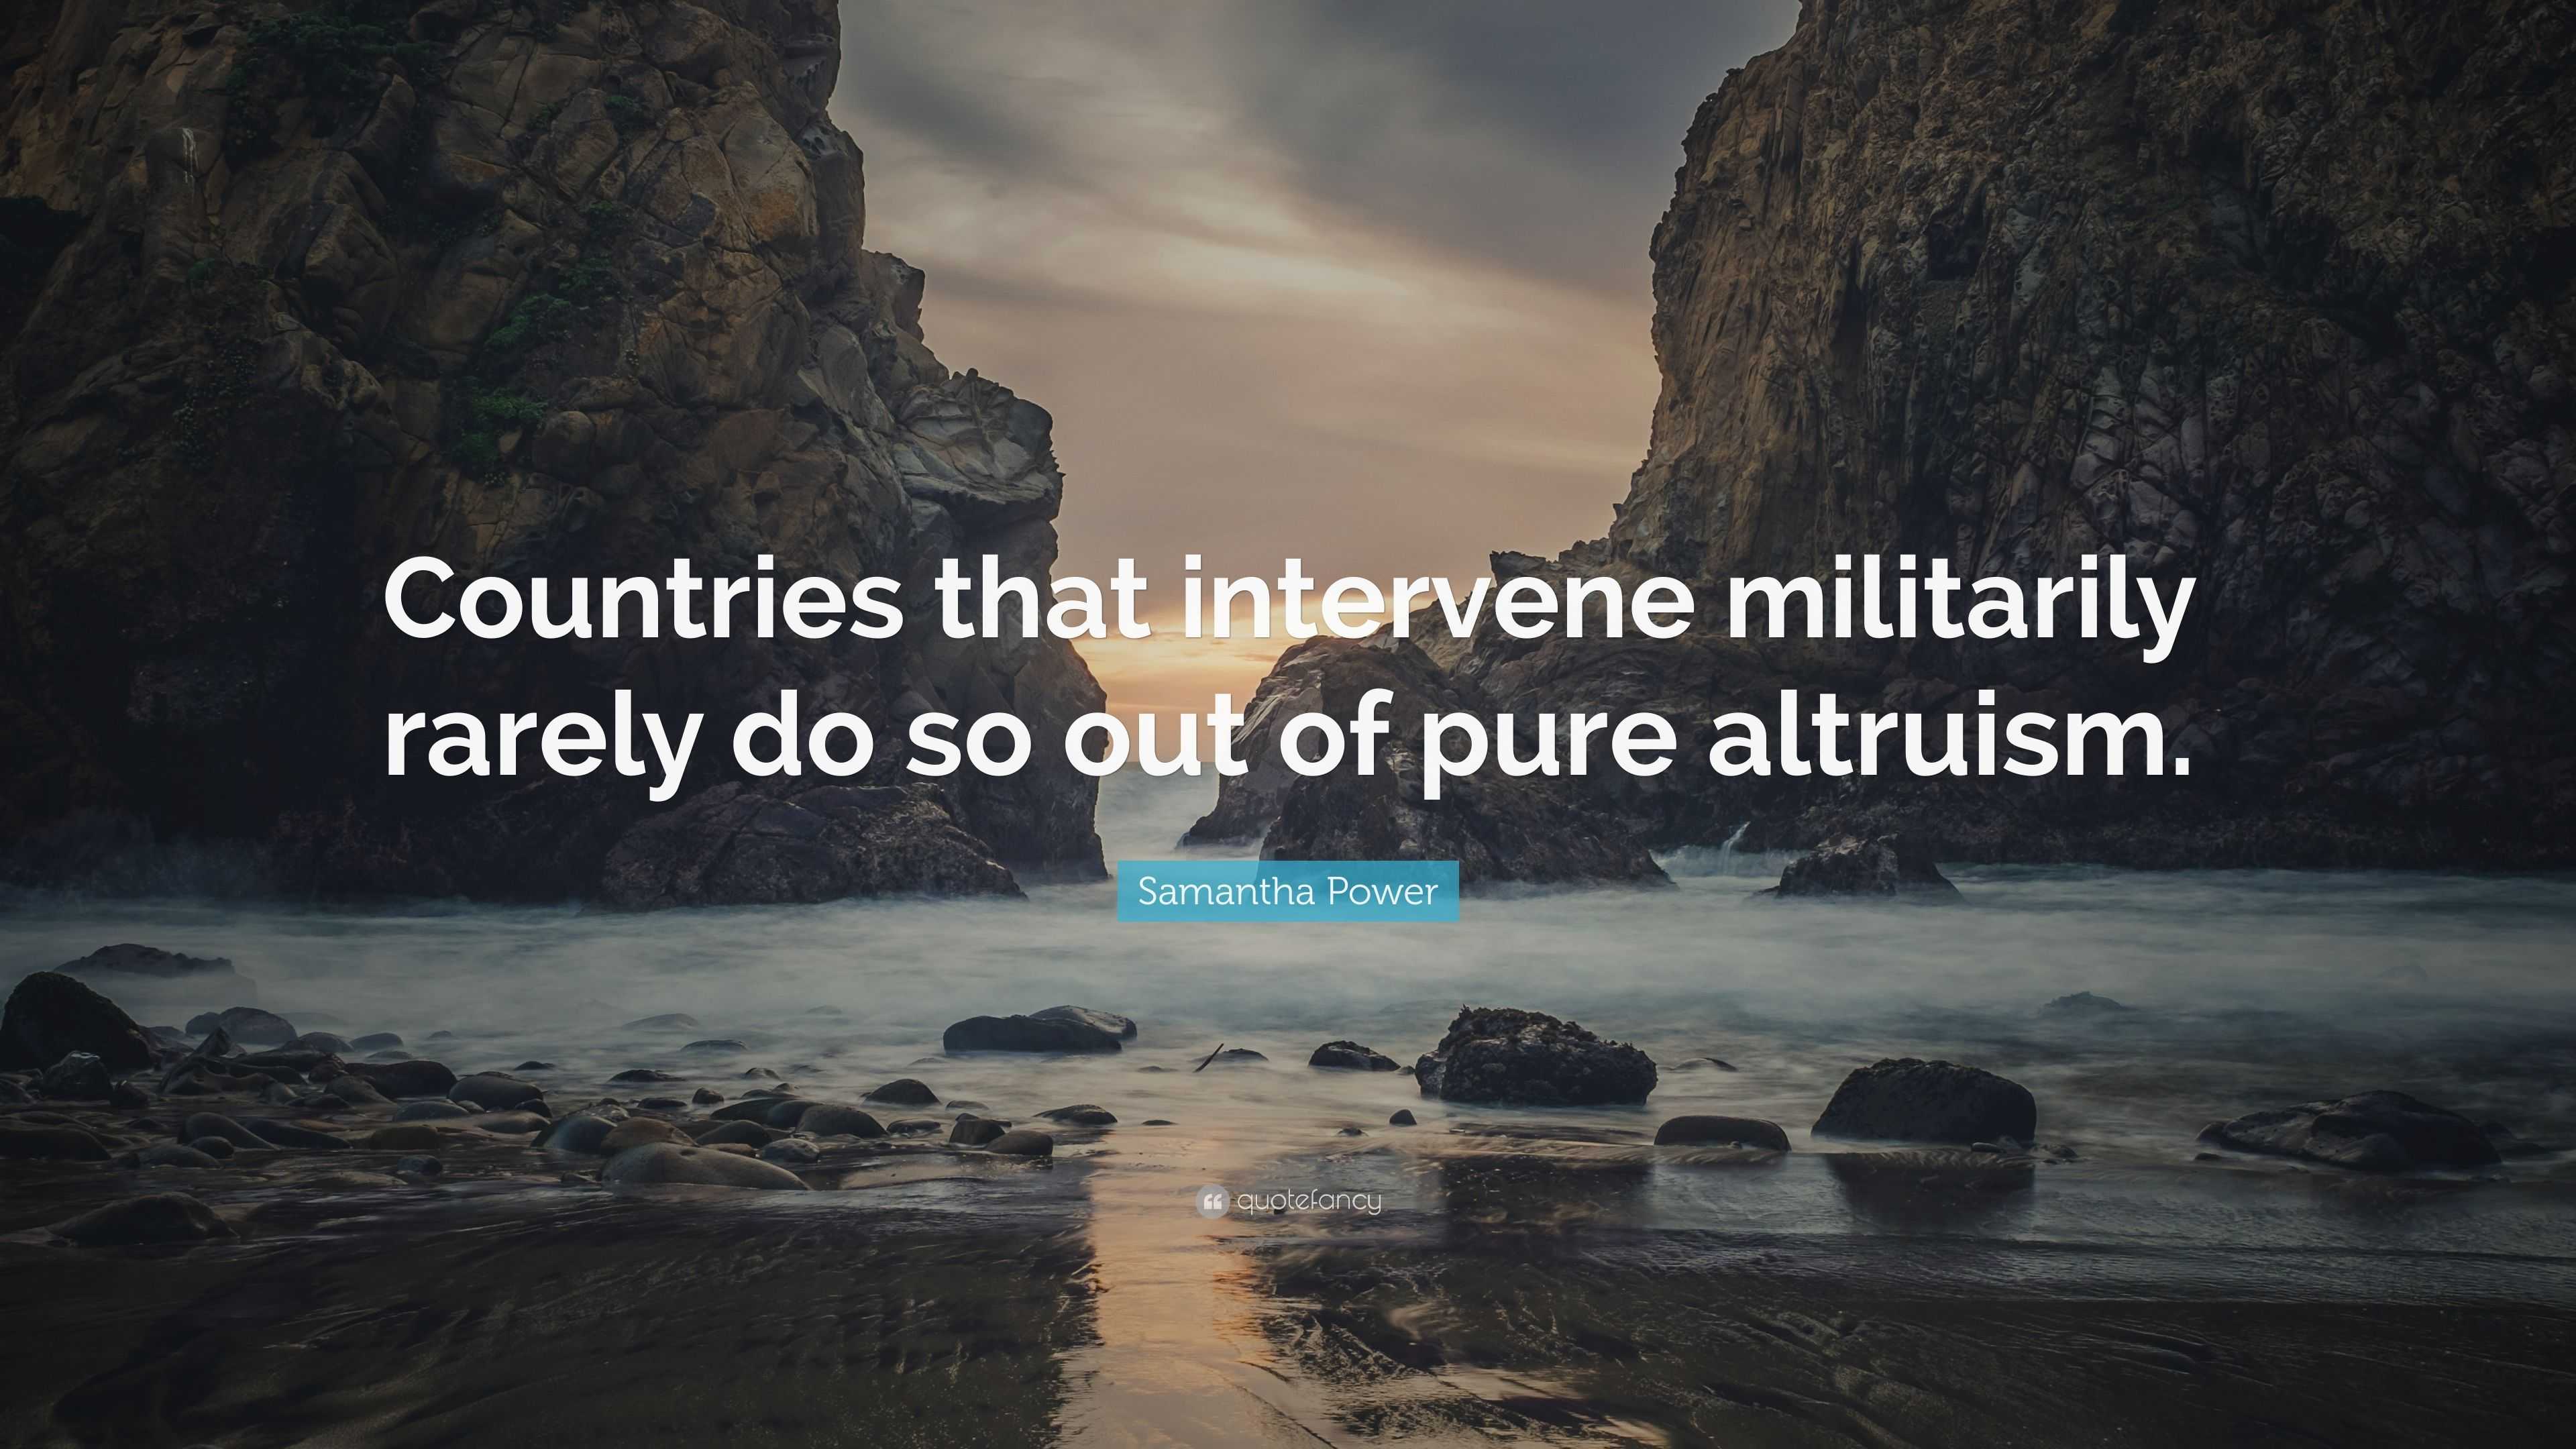 Samantha Power Quote: “Countries that intervene militarily rarely do so ...